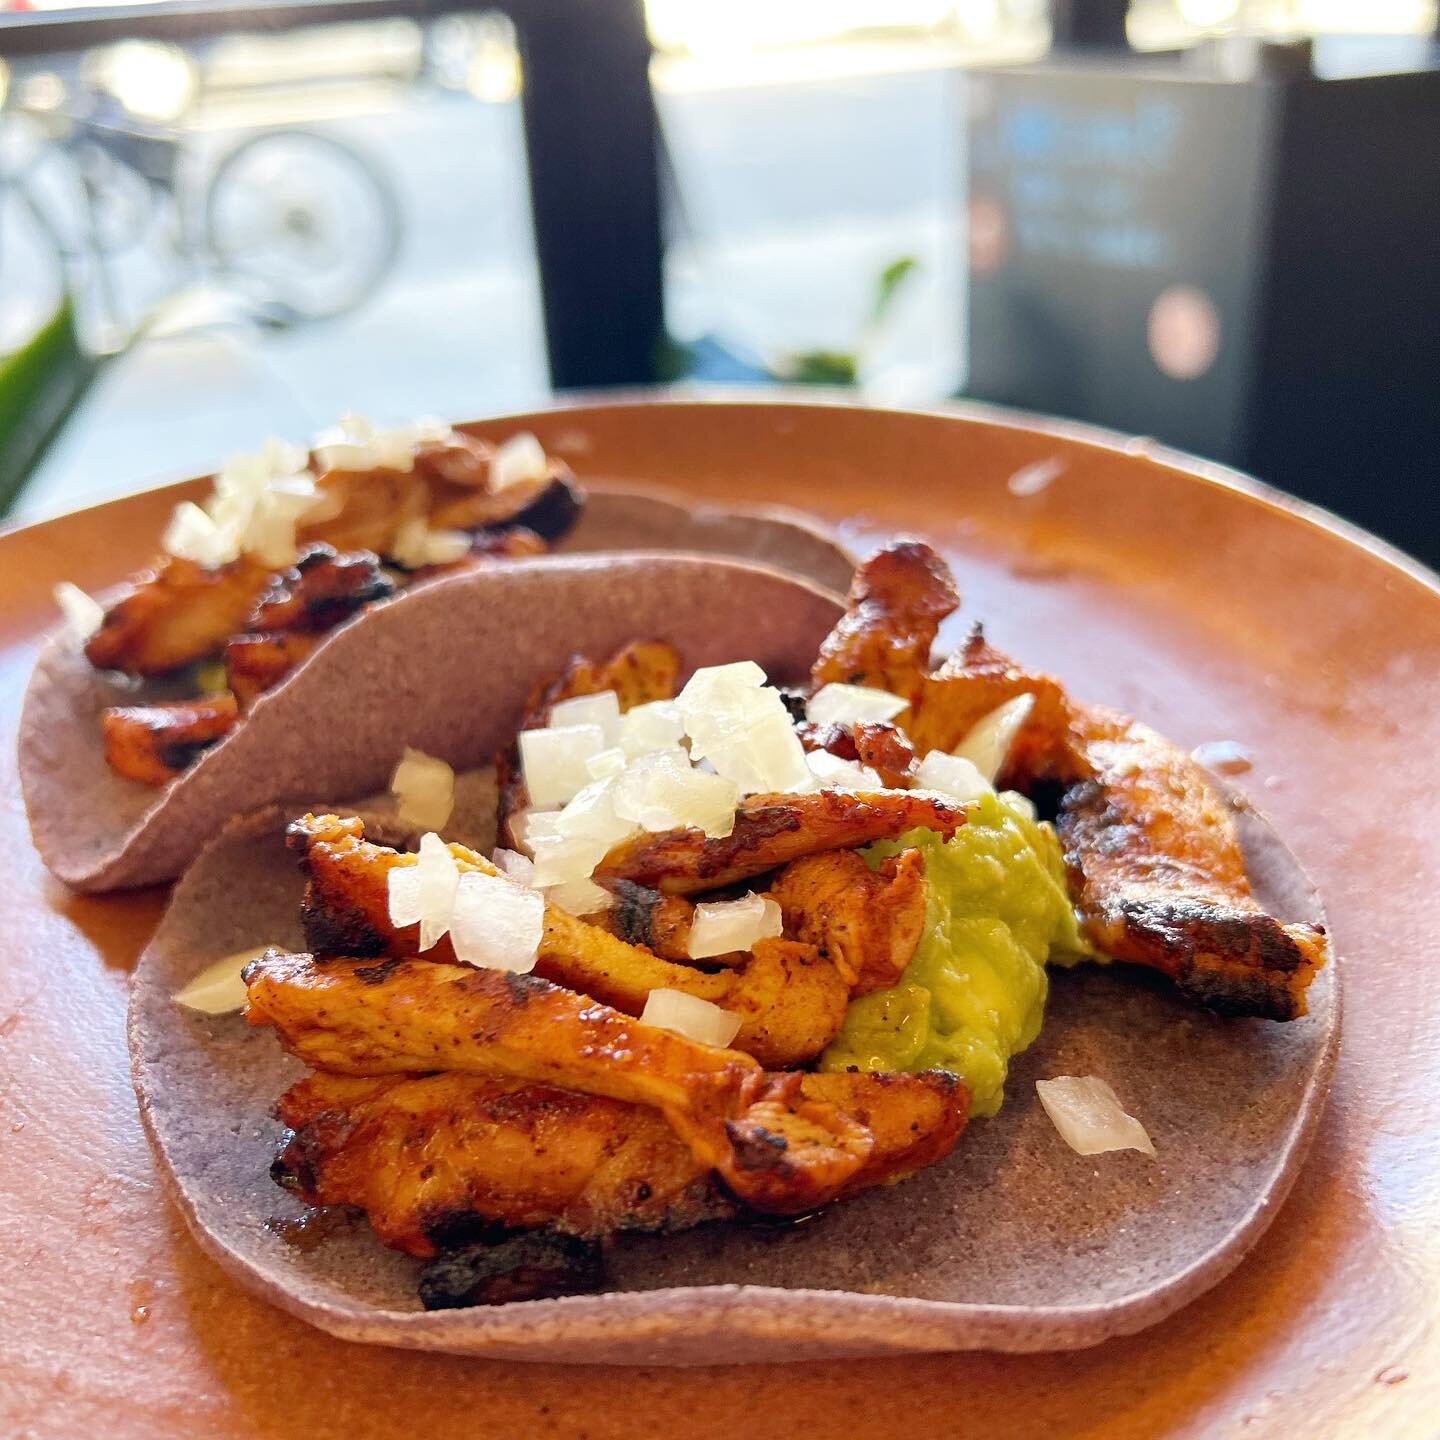 Let&rsquo;s taco &lsquo;bout tacos 🌮 

What&rsquo;s your favorite taco topping? Add yours in the comments 📝

📸: chicken tacos from @lolitasrva featuring adobo chicken, guacamole, cilantro and onions 🍗 🥑 🌿 🧅